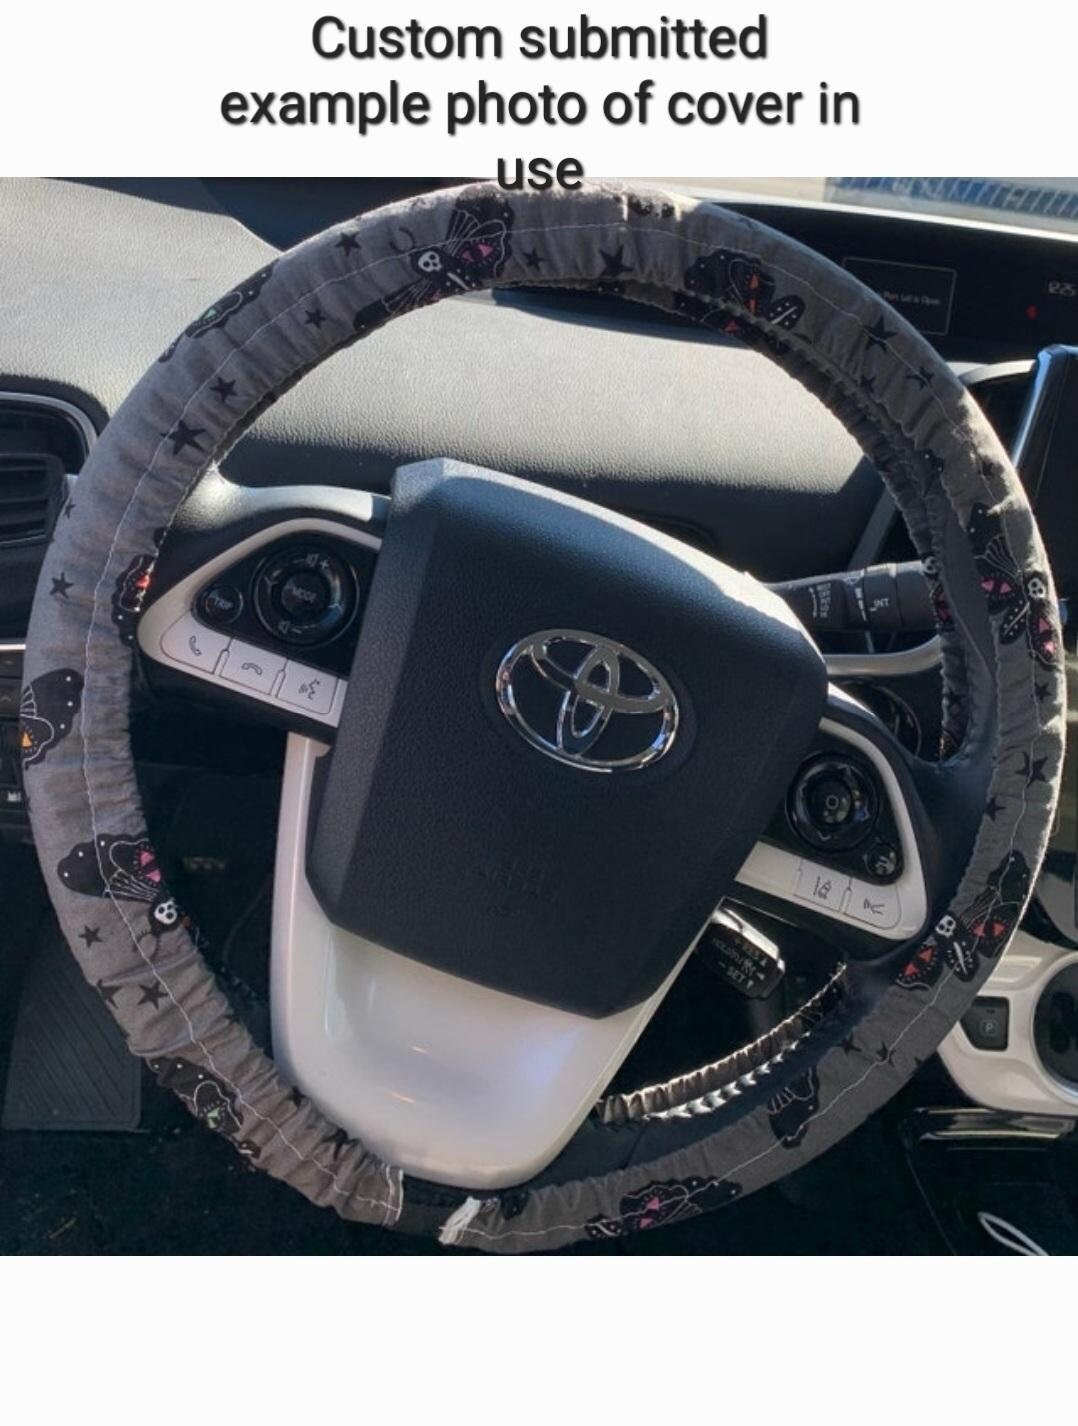 Bumble Bee Steering Wheel Cover